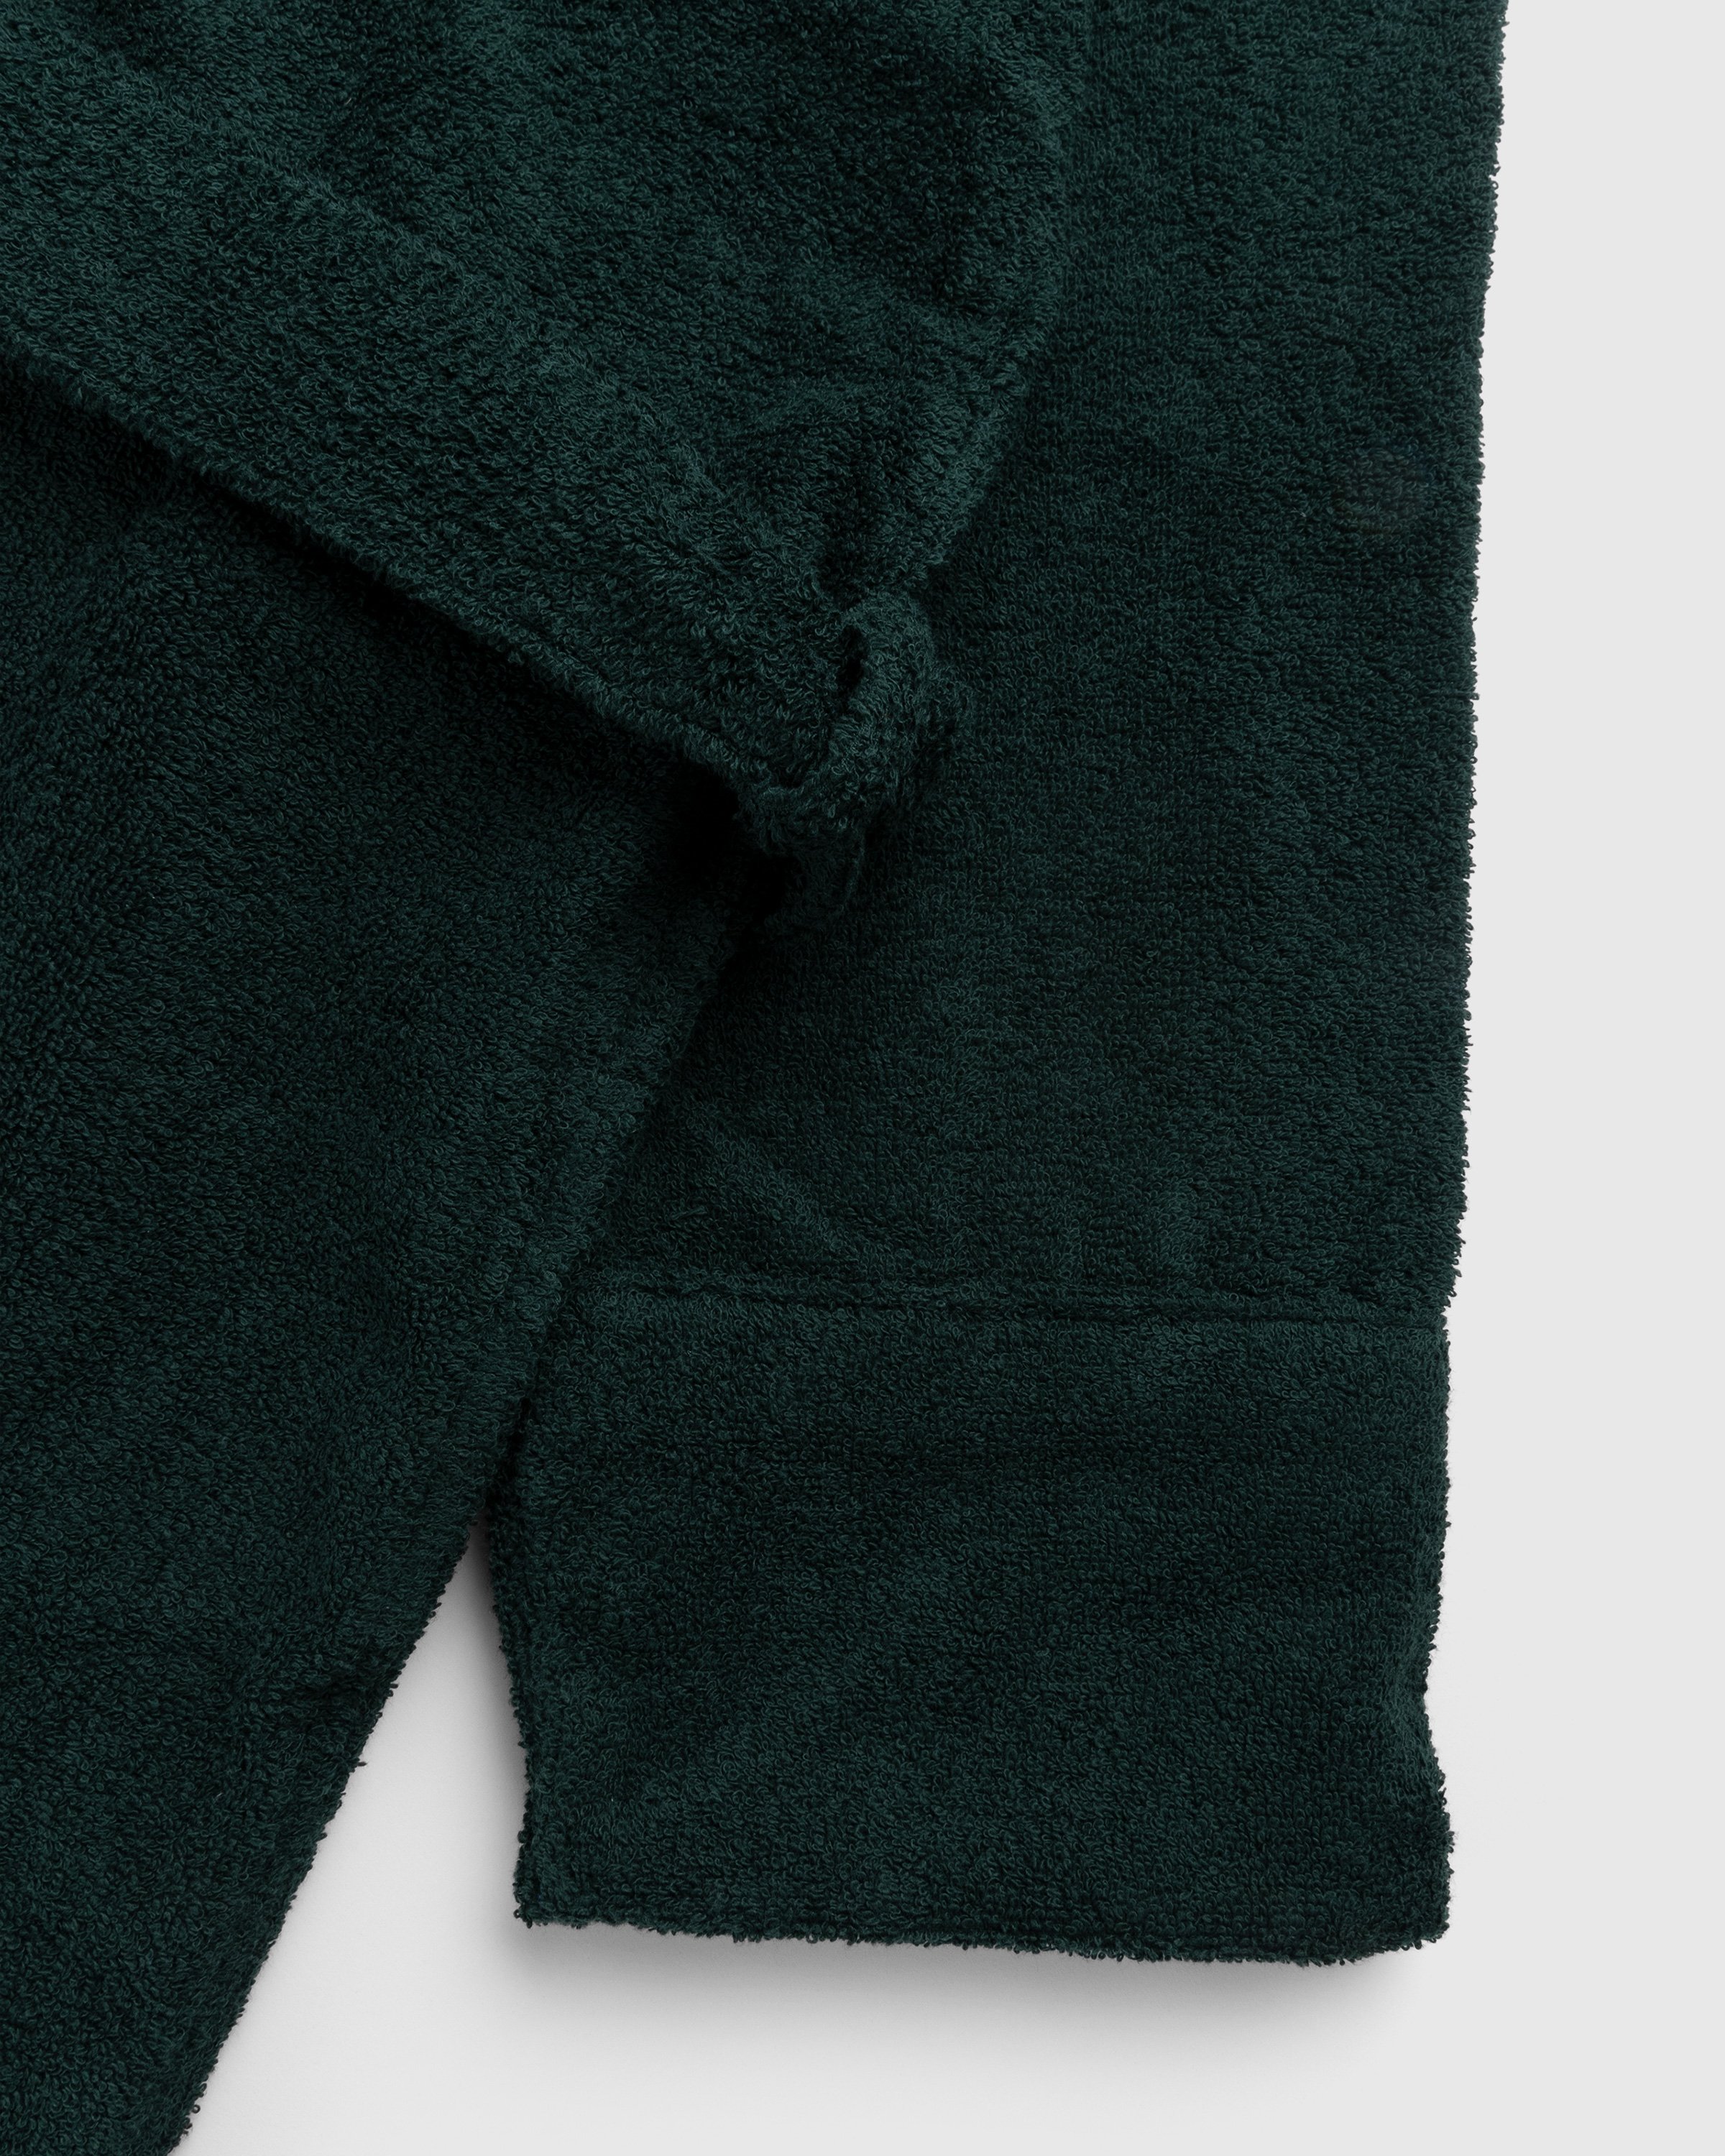 Tekla - Hooded Bathrobe Solid Forest Green - Lifestyle - Green - Image 5